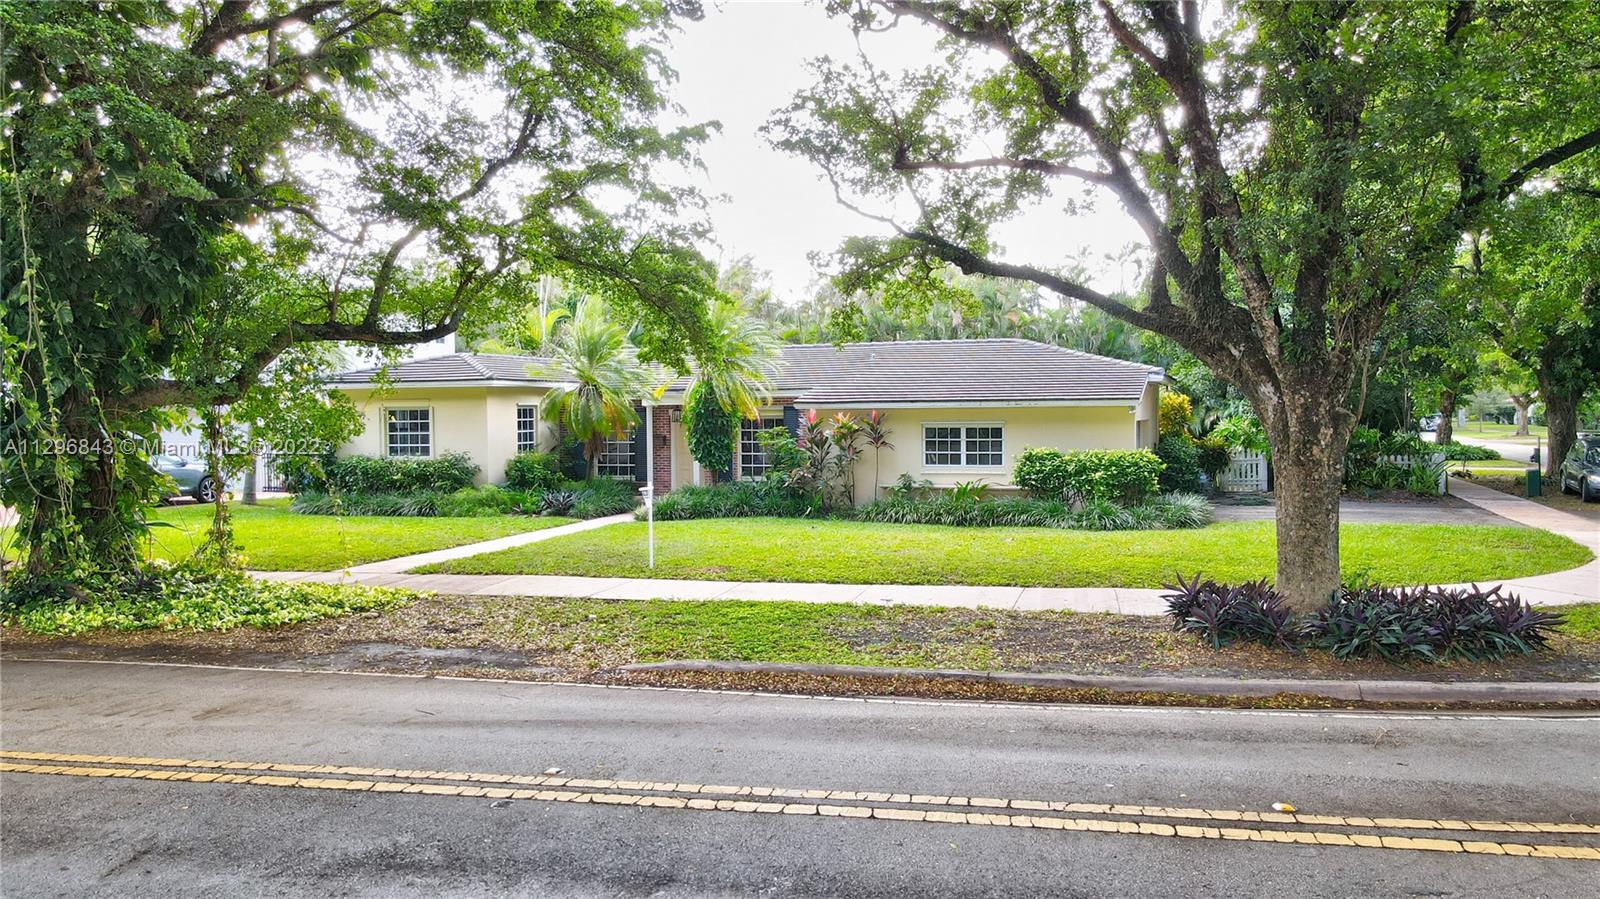 FABULOUS prime location for this charming 3 Bedroom 2 bath home on 11,100 sq ft oversized double corner lot on prestigious South Gables street. Live within walking or biking distance to University of Miami, downtown SOMI, or Sunset Elementary. House has newer roof(2015), original wood floors and a 2 car garage with plenty of room for a pool. Flood zone X.  Update with your own choices, expand existing structure, or build the new forever home you have been dreaming about. The possibilities are endless! More pictures to come.